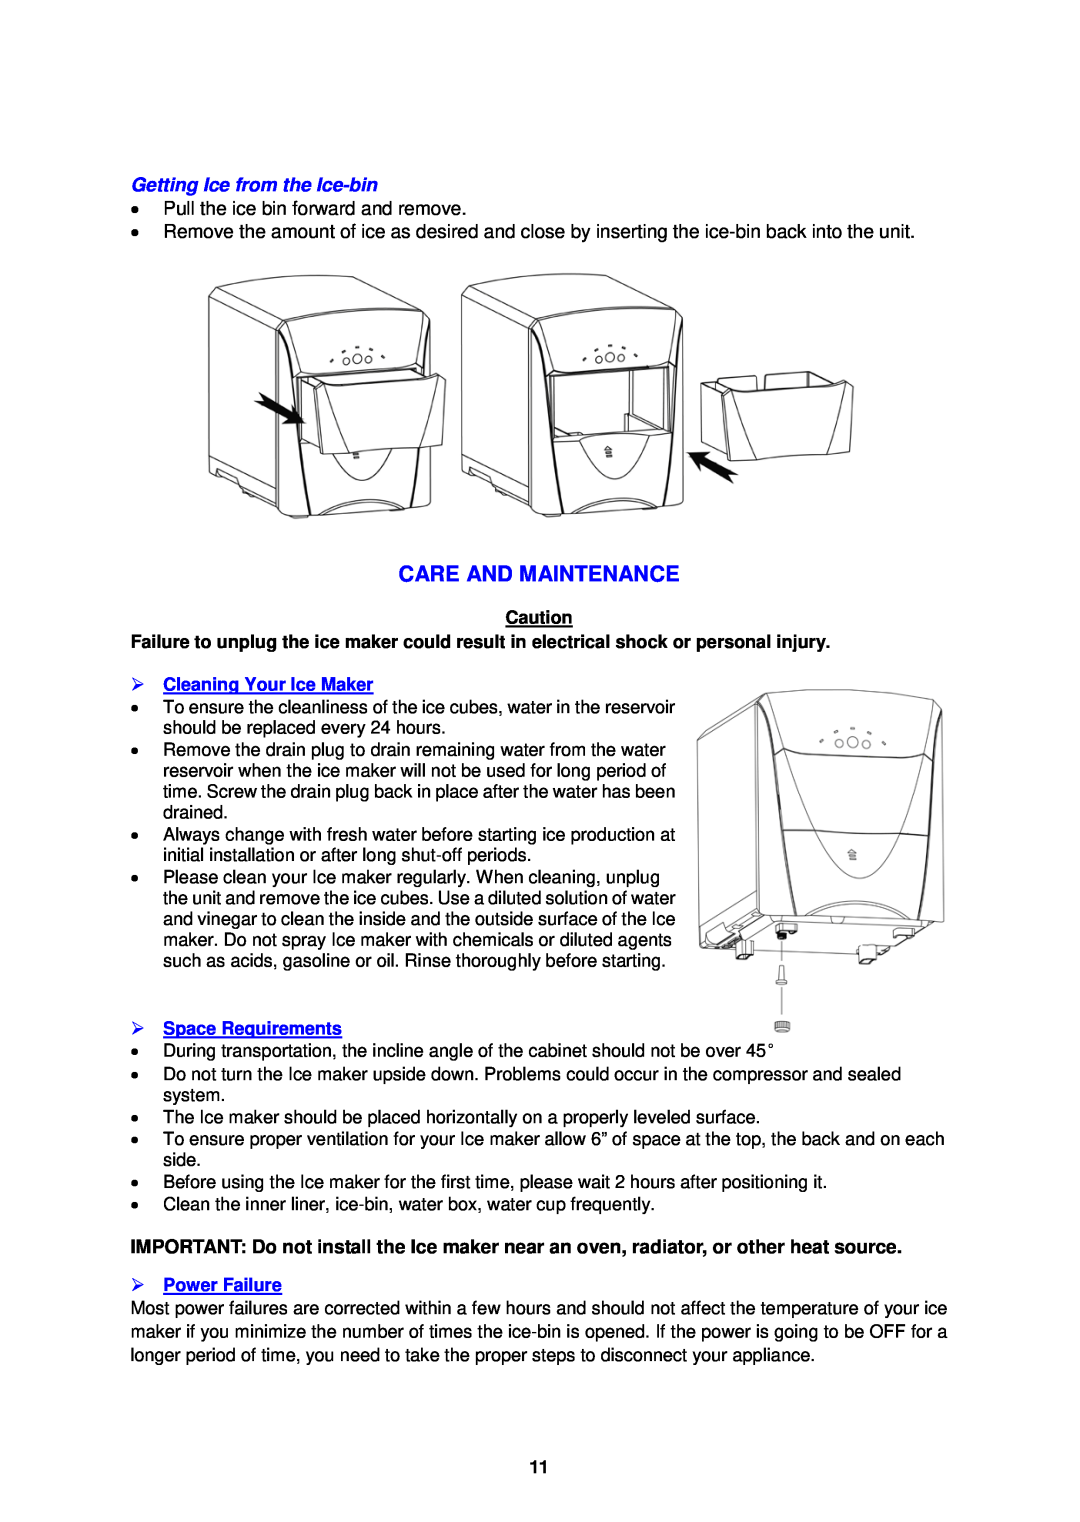 Avanti PIM25SS Care And Maintenance, Getting Ice from the Ice-bin, Cleaning Your Ice Maker, Space Requirements 